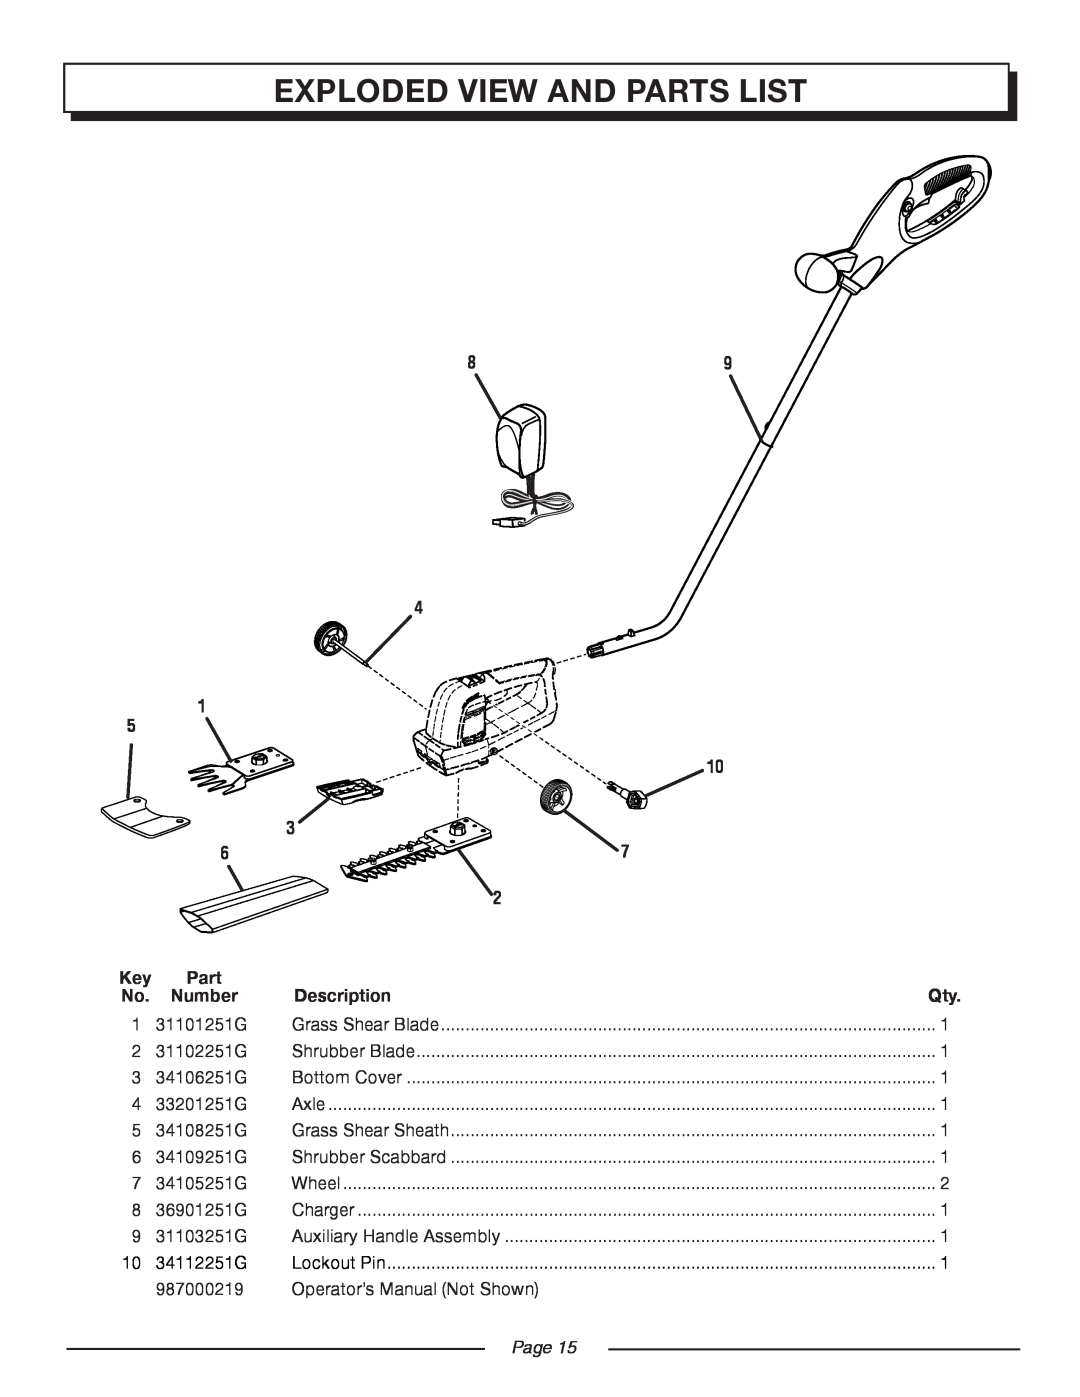 Homelite UT44170 manual Exploded View And Parts List, Number, Description, Page 